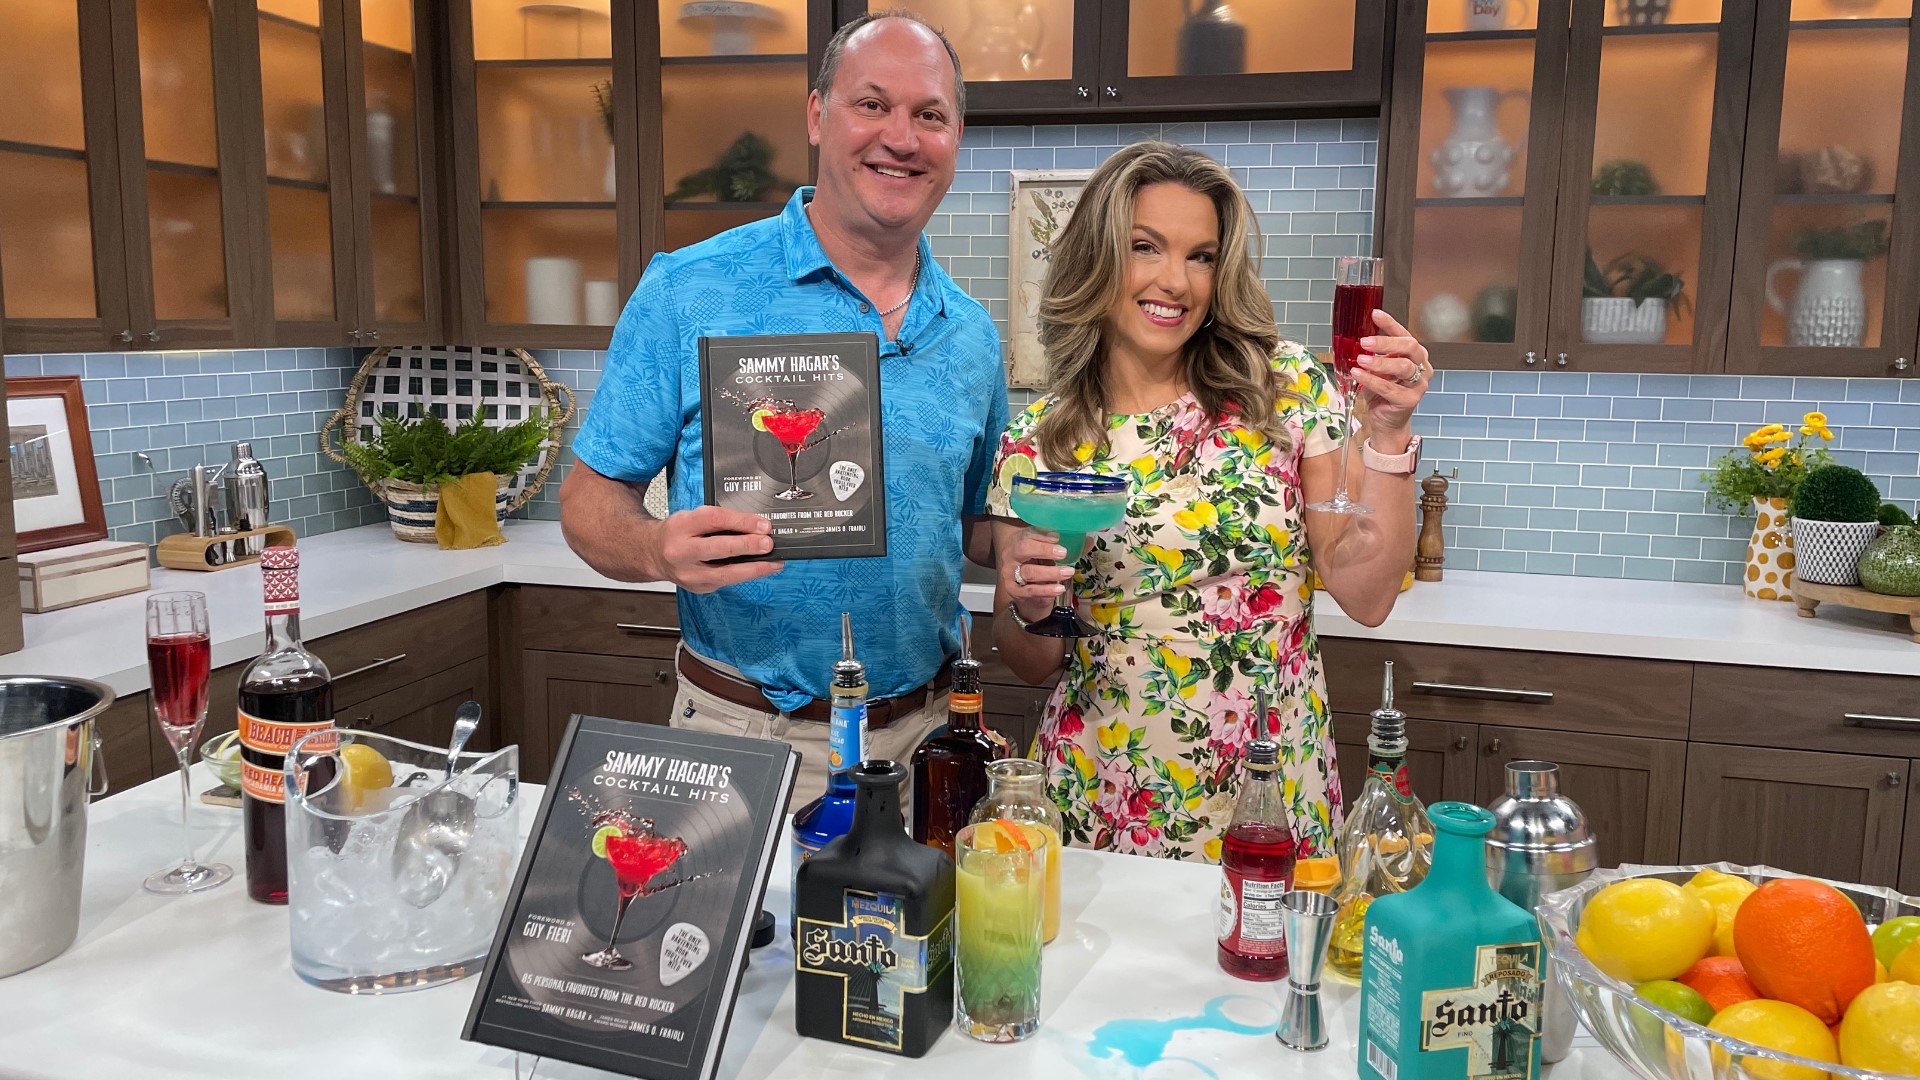 Culinary author James Fraioli created three cocktails with rock legend Sammy Hagar for their book "Cocktail Hits." Be a rockstar with these recipes! #newdaynw